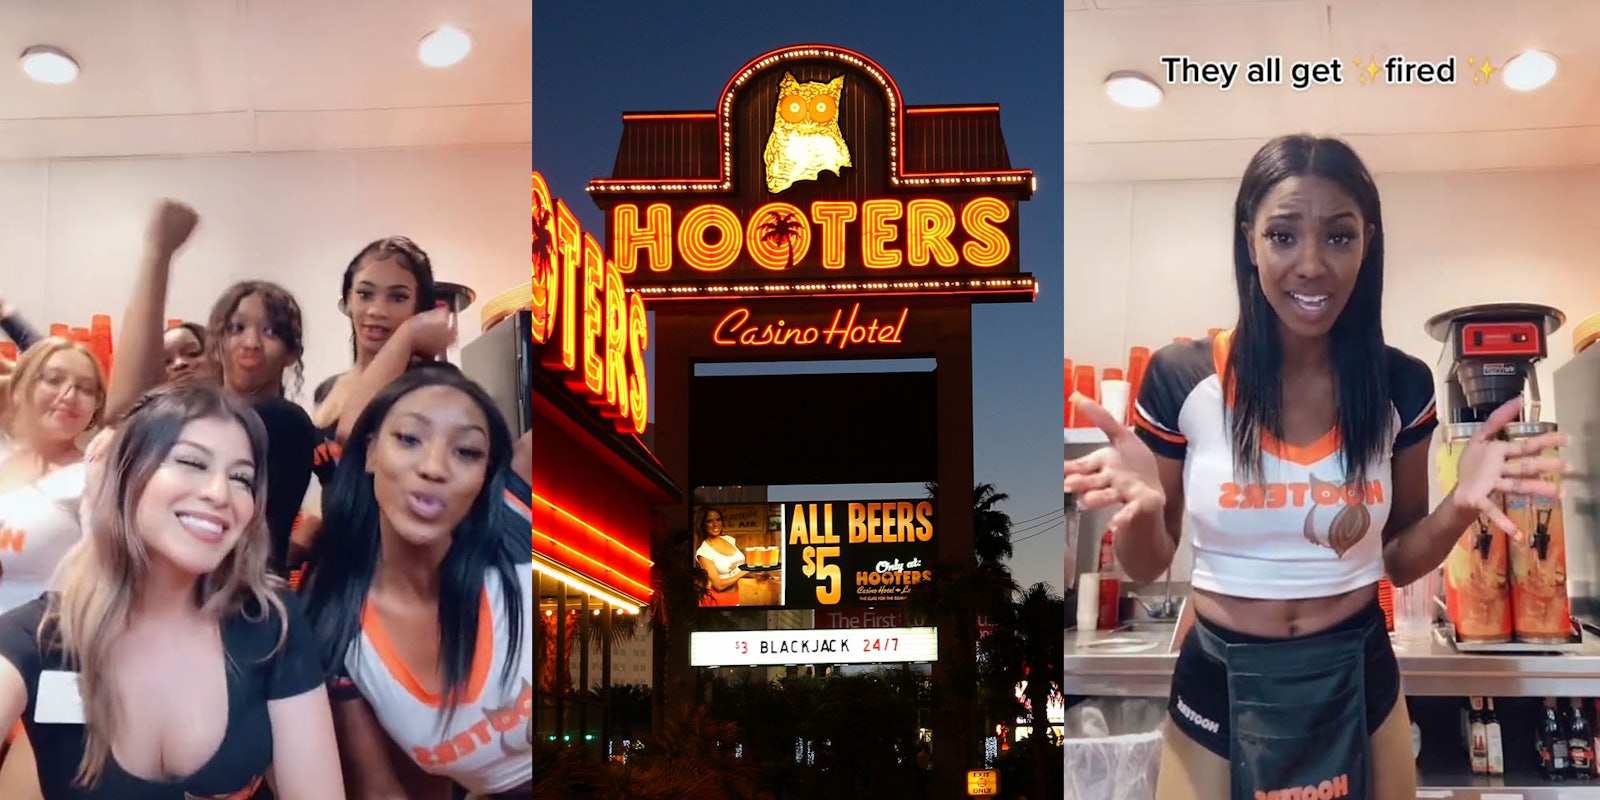 Hooters employees dancing in tiktok (l) Hooters sign and building (c) Hooters worker caption 'They all got fired' (r)